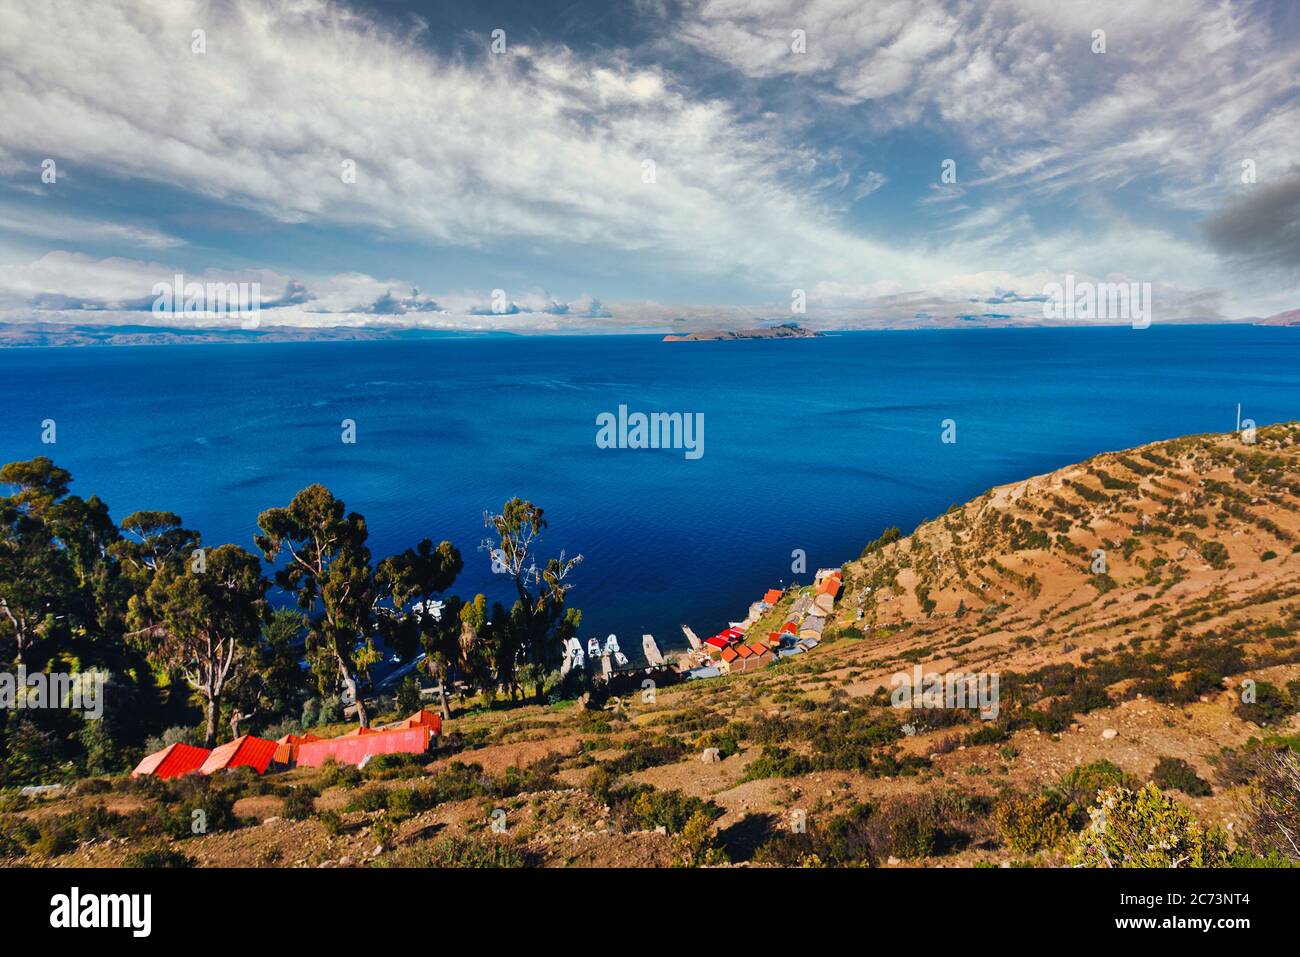 View of the Titicaca Lake on the border of Peru and Bolivia. By volume of water, it is the largest lake in South America.It is often called the highes Stock Photo